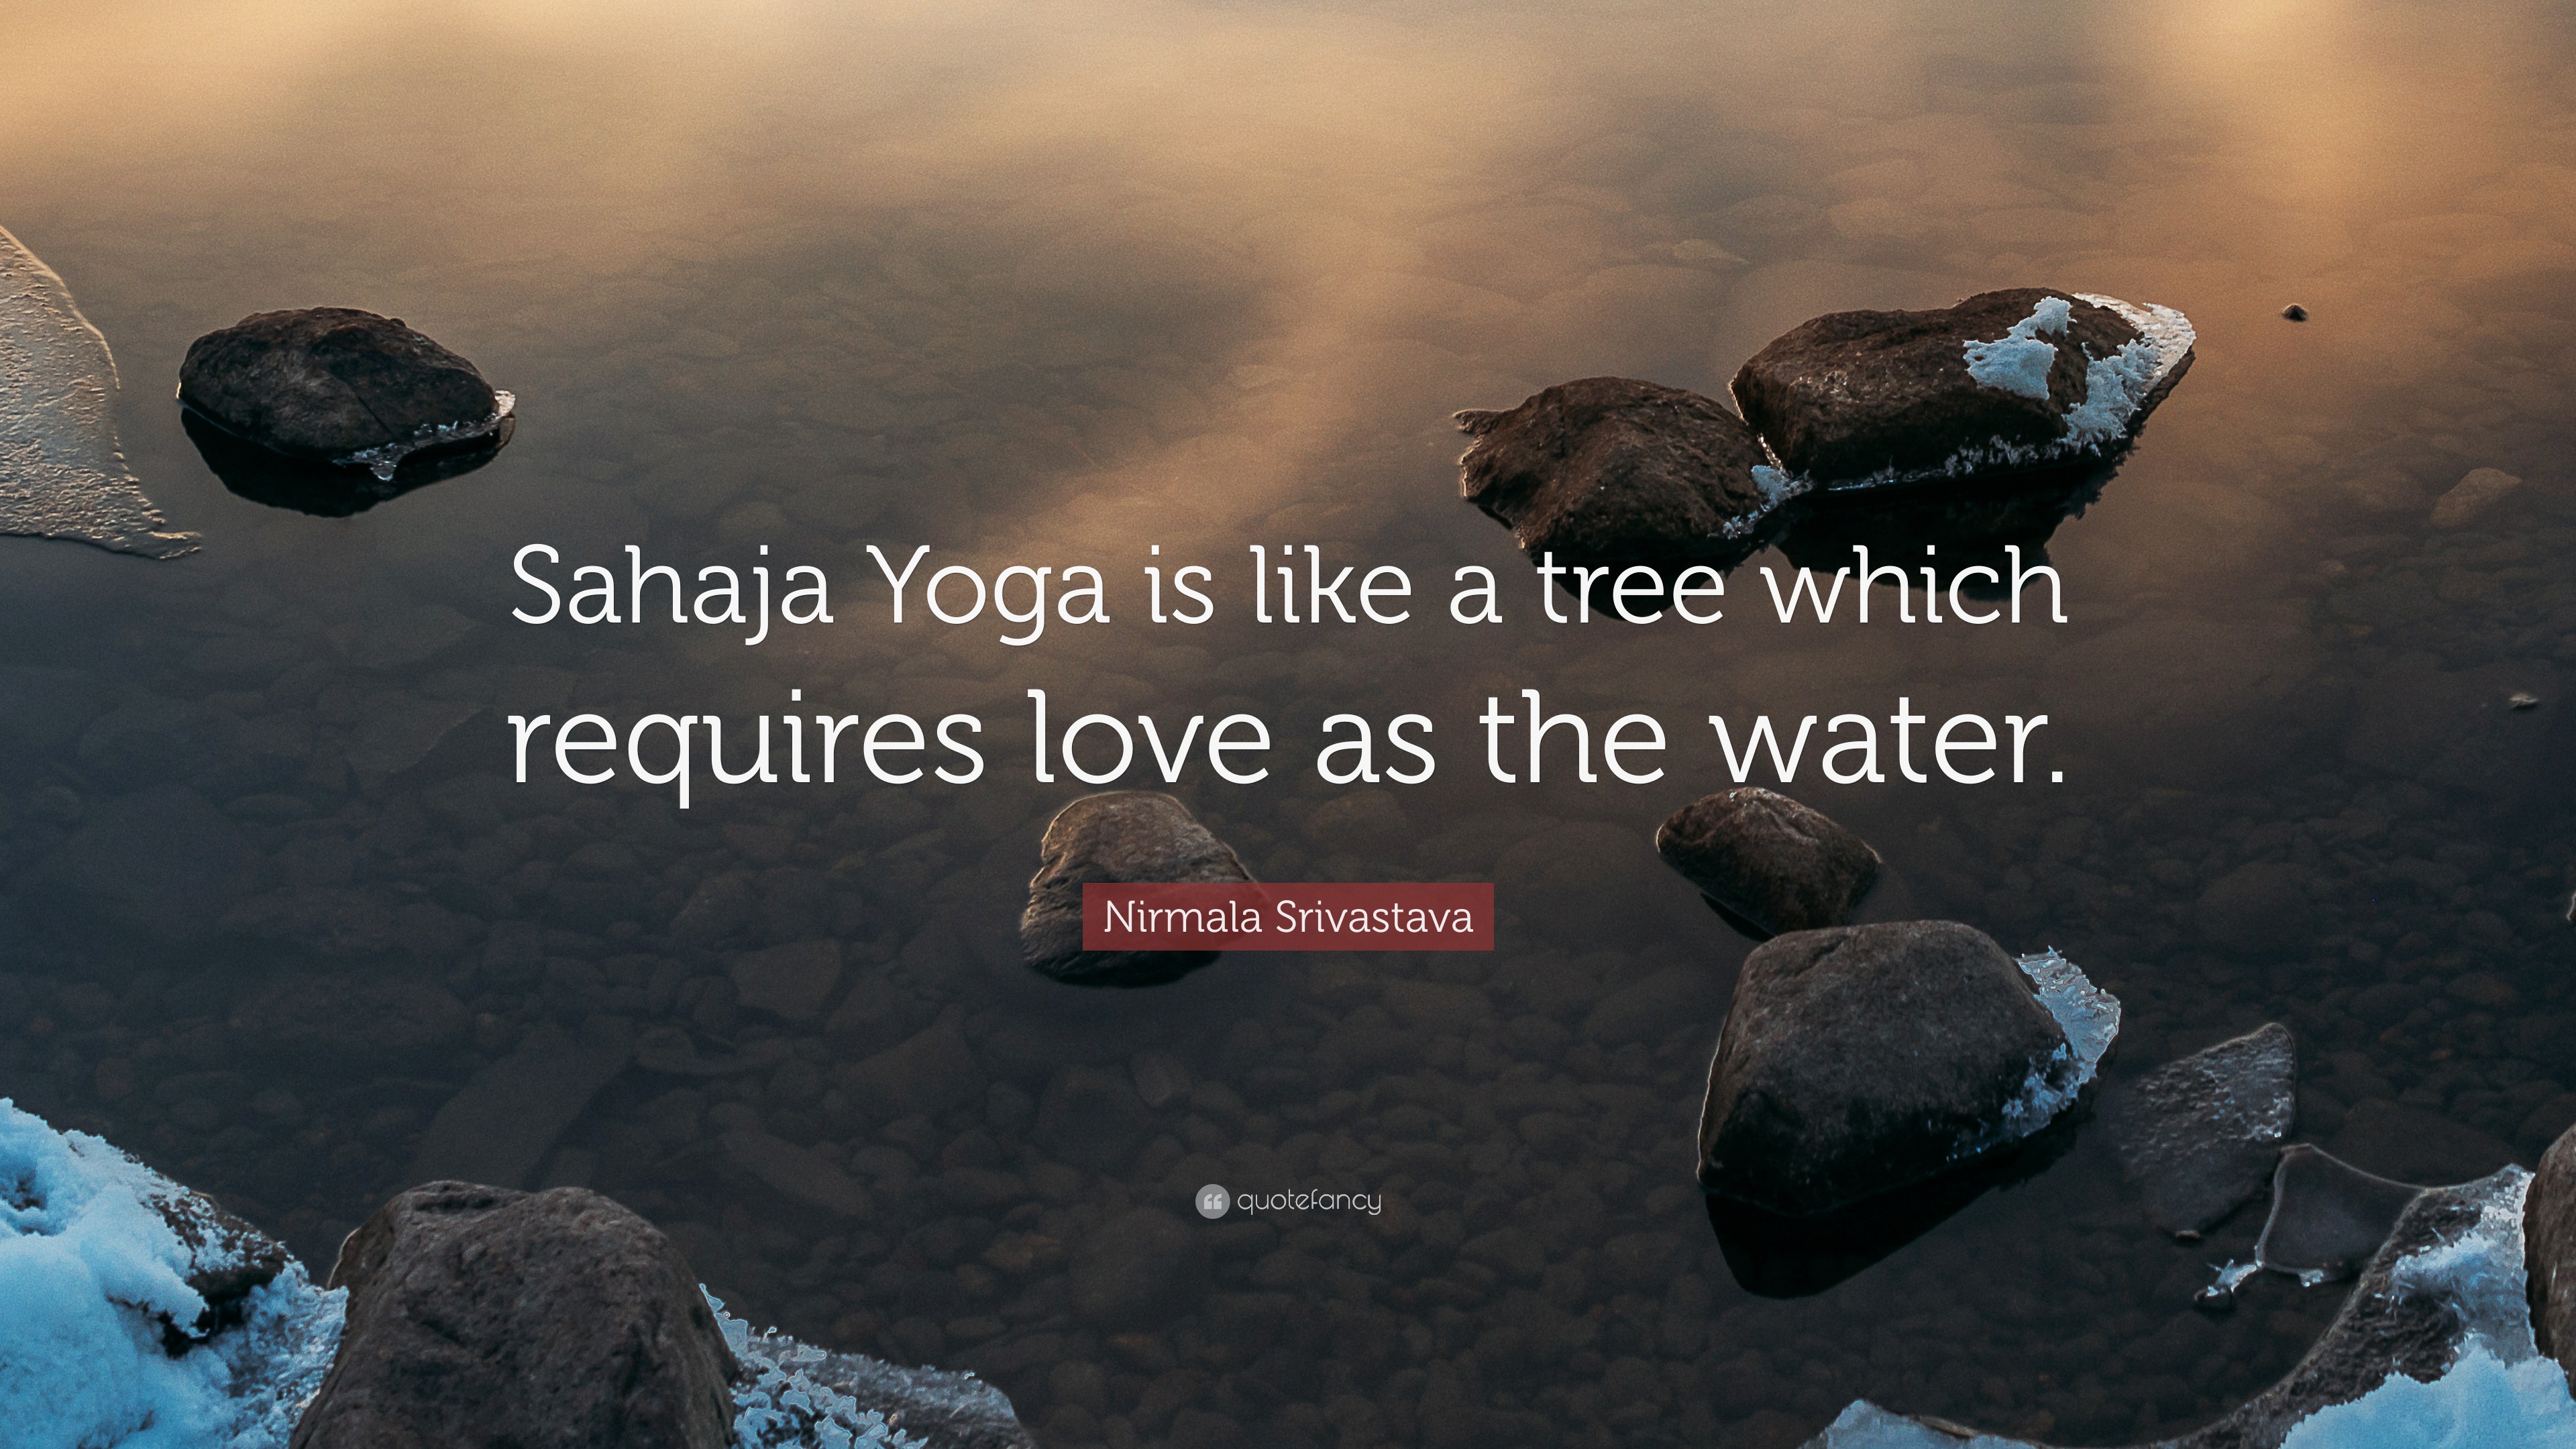 Nirmala Srivastava Quote: “Sahaja Yoga is like a tree which requires love  as the water.”